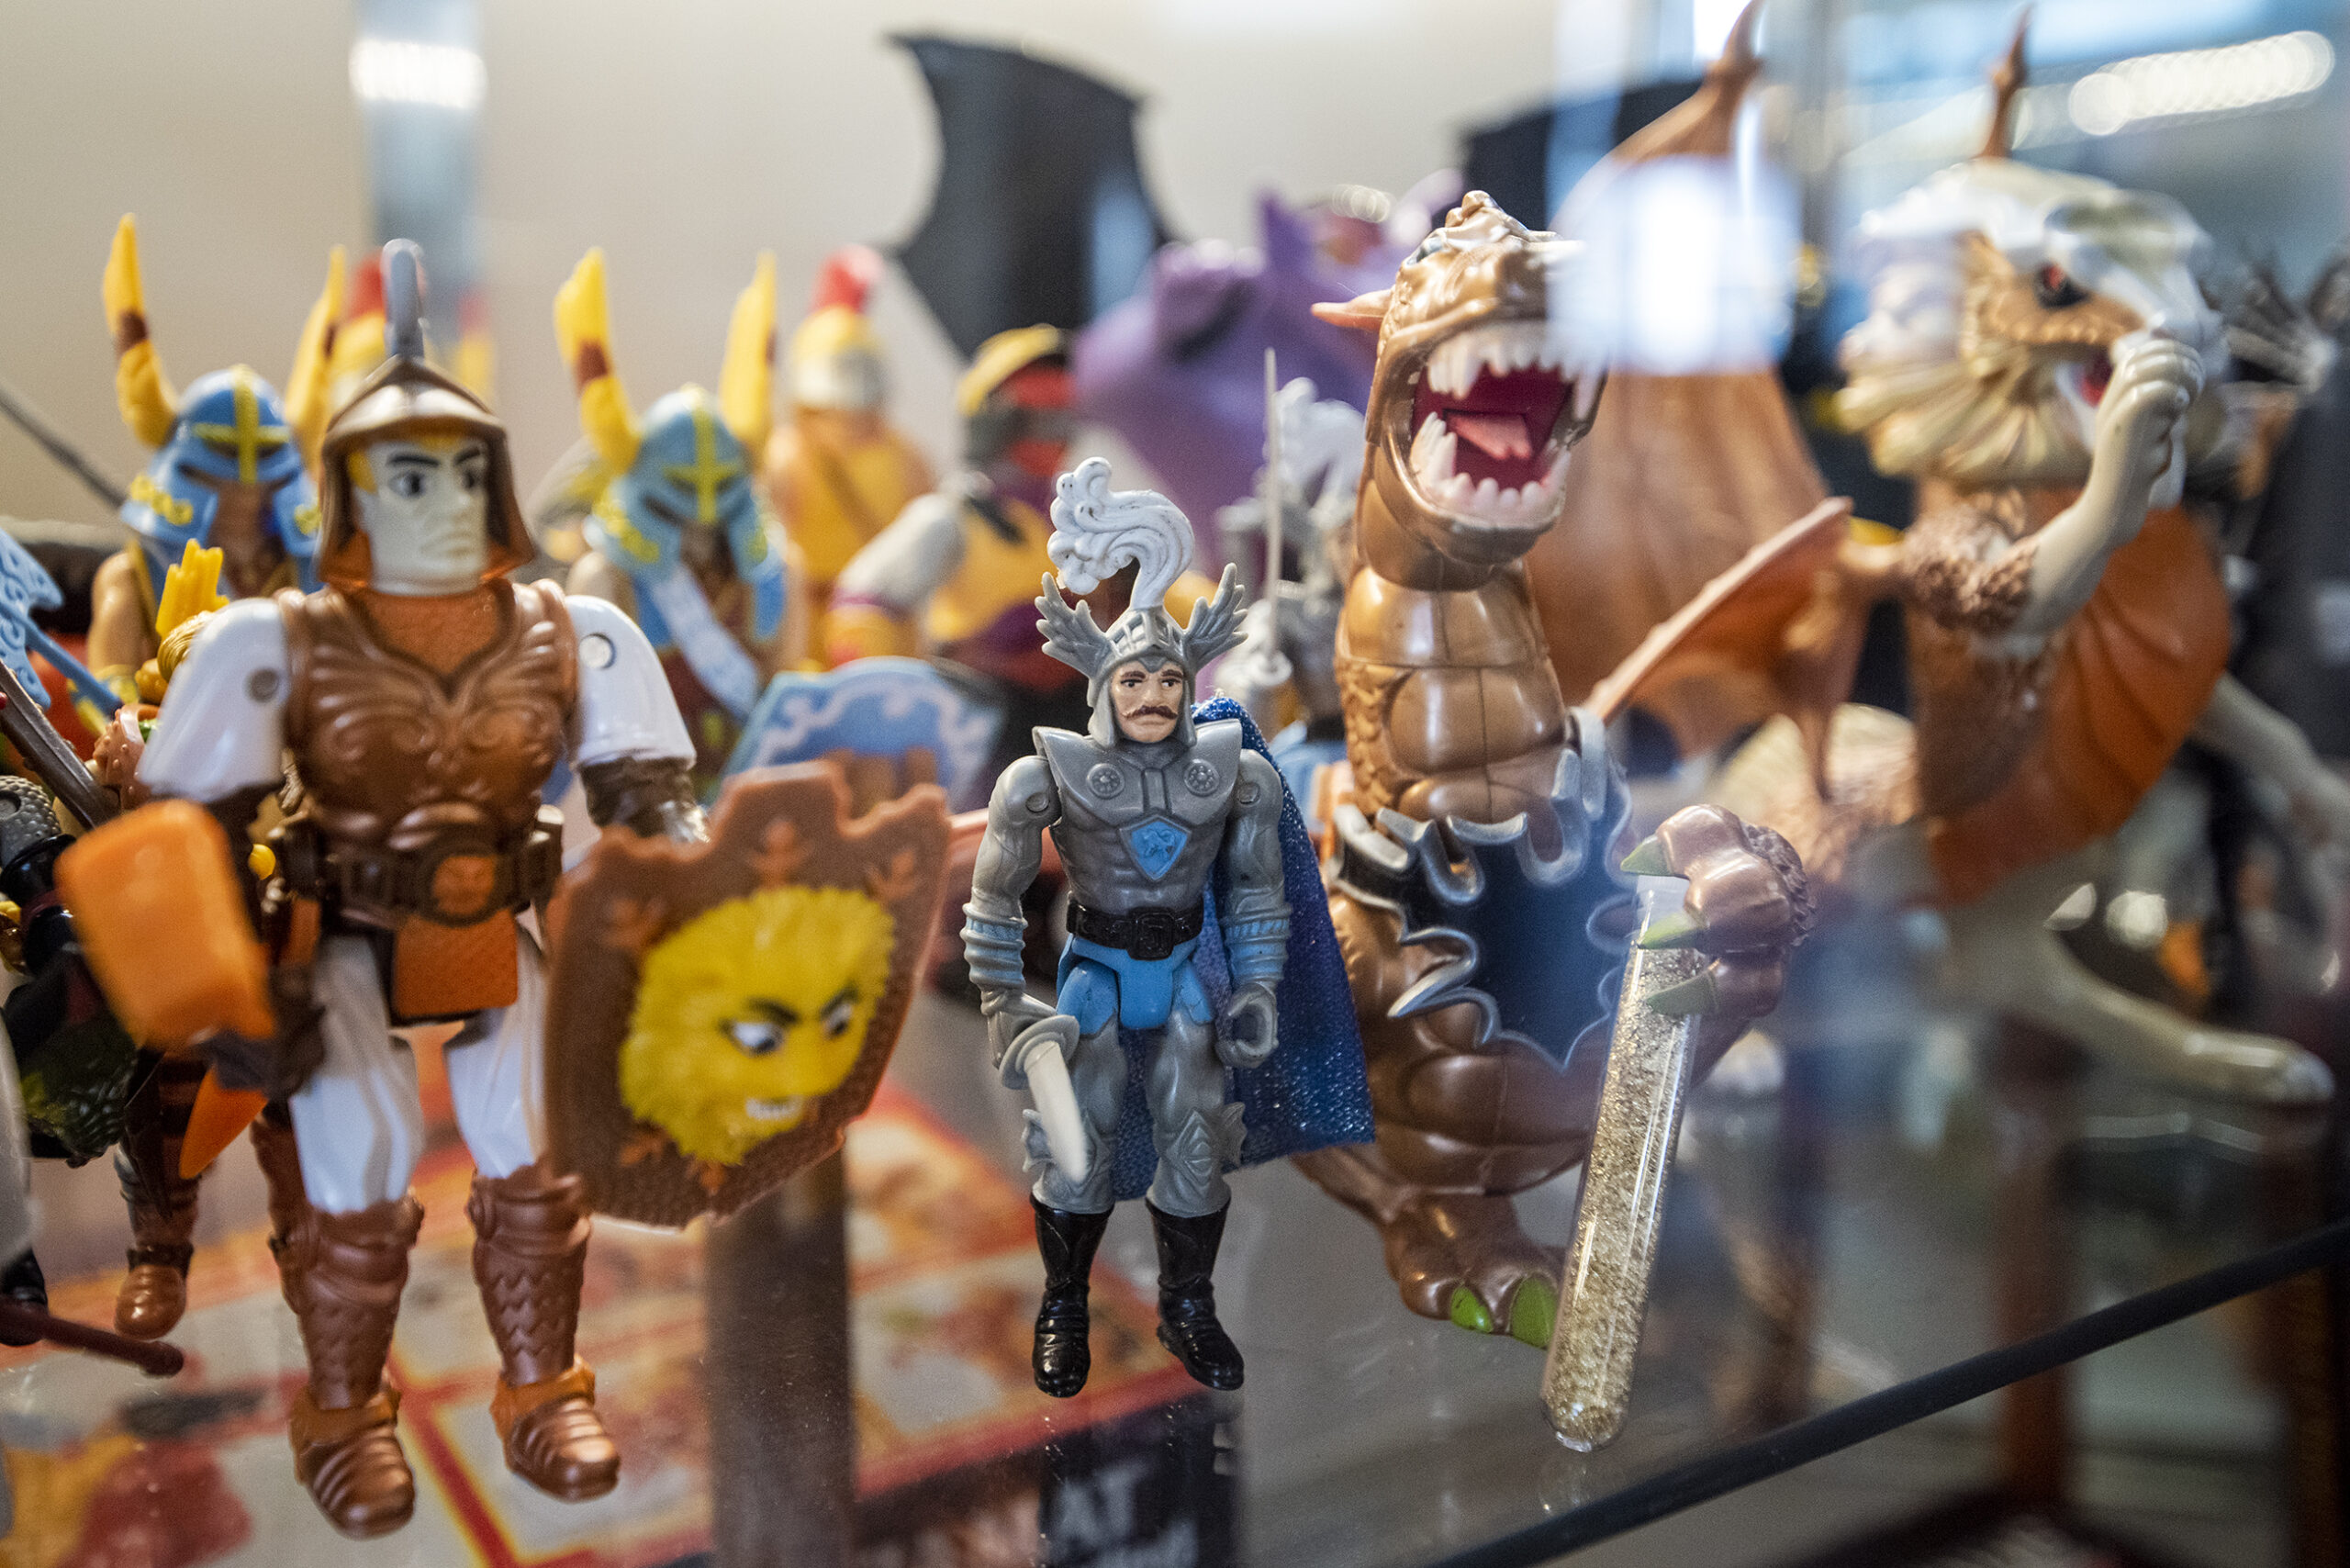 Lake Geneva Museum Upholds Legacy Of Dungeons & Dragons, Role-Playing Games